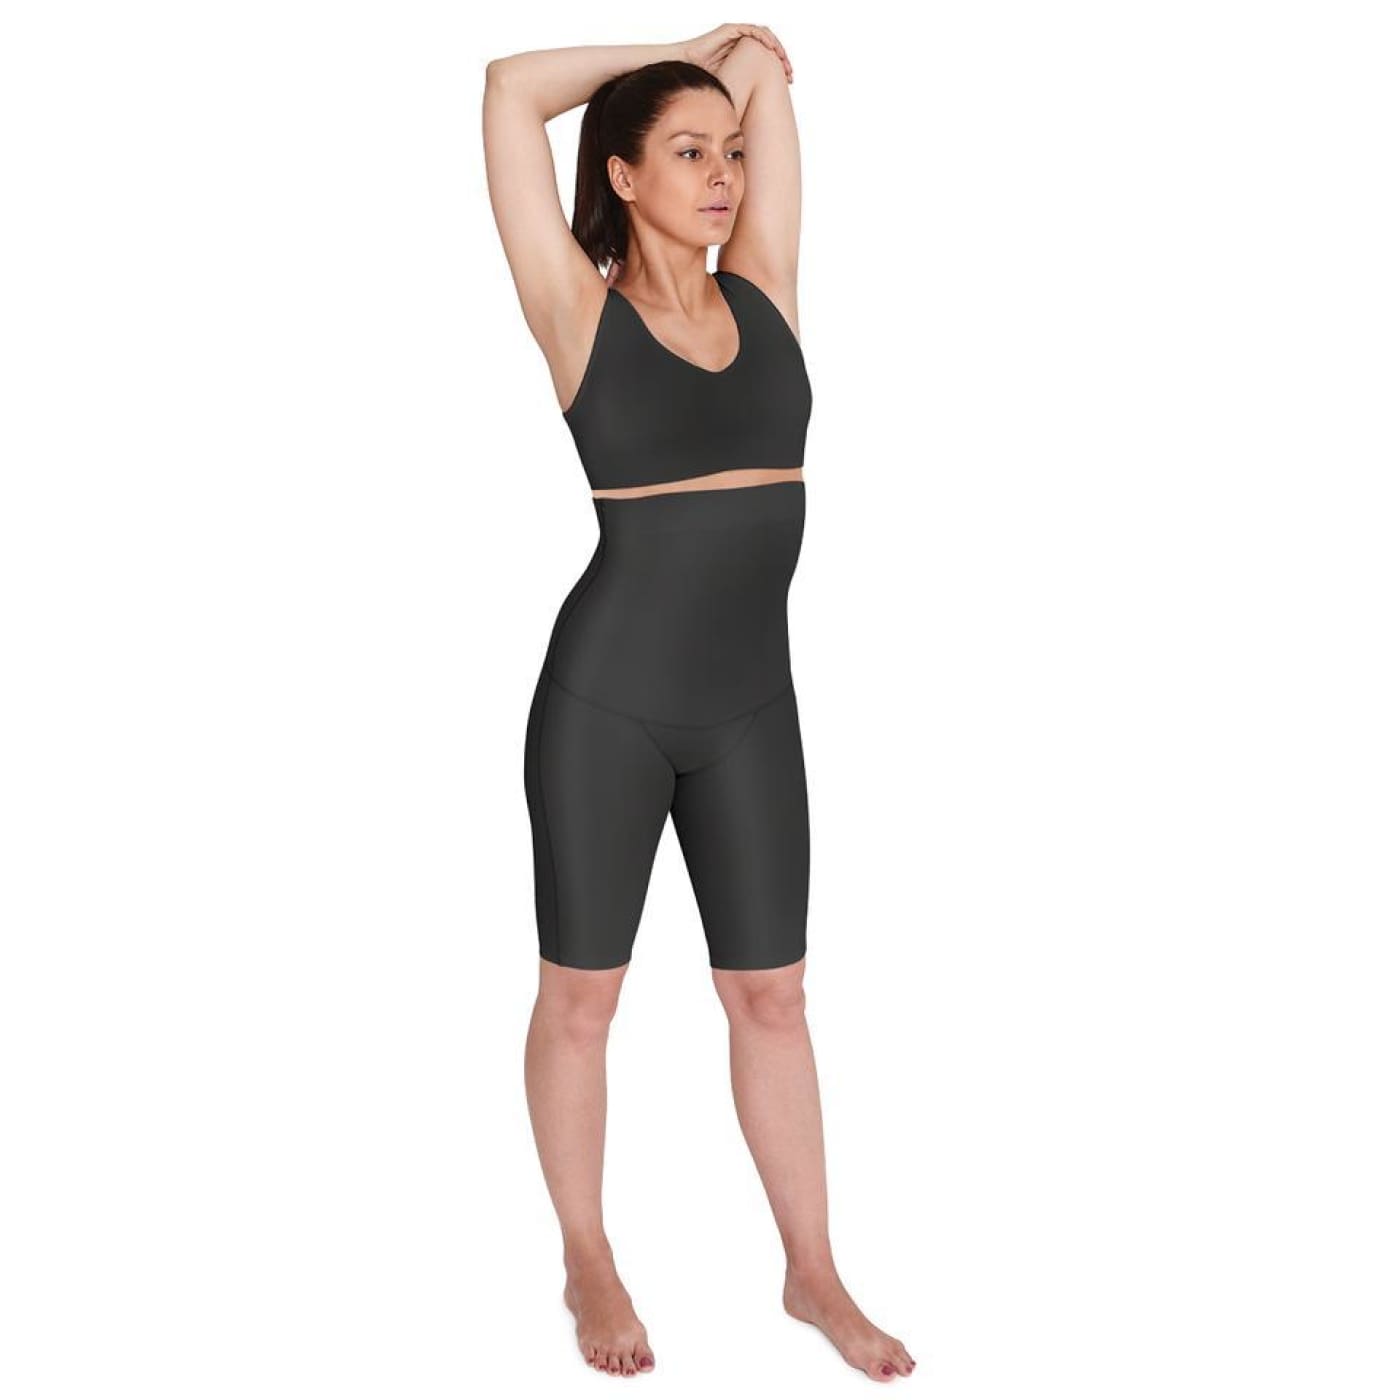 SRC Recovery Shorts - Black S - FOR MUM - MATERNITY SUPPORT GARMENTS (PRE/POST)